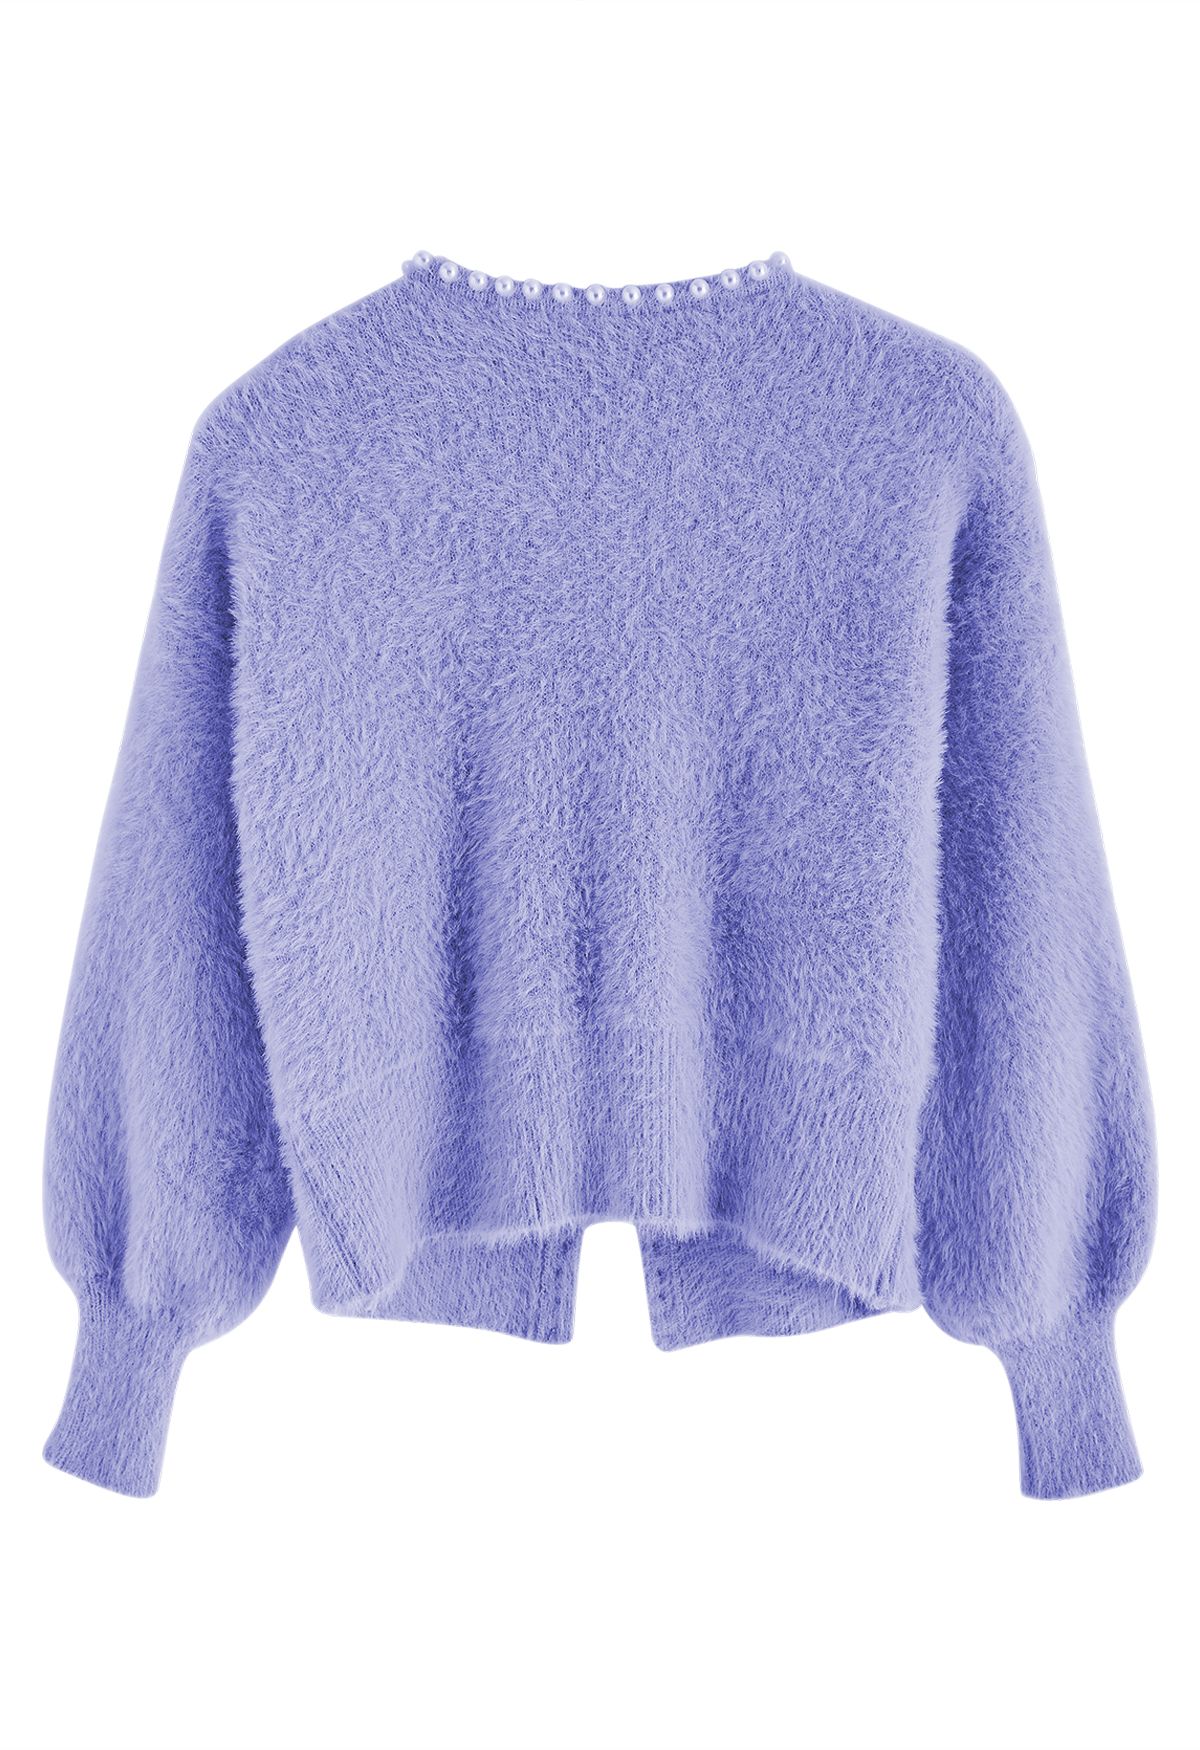 Open Front Pearly Fuzzy Knit Cardigan in Blue - Retro, Indie and Unique ...